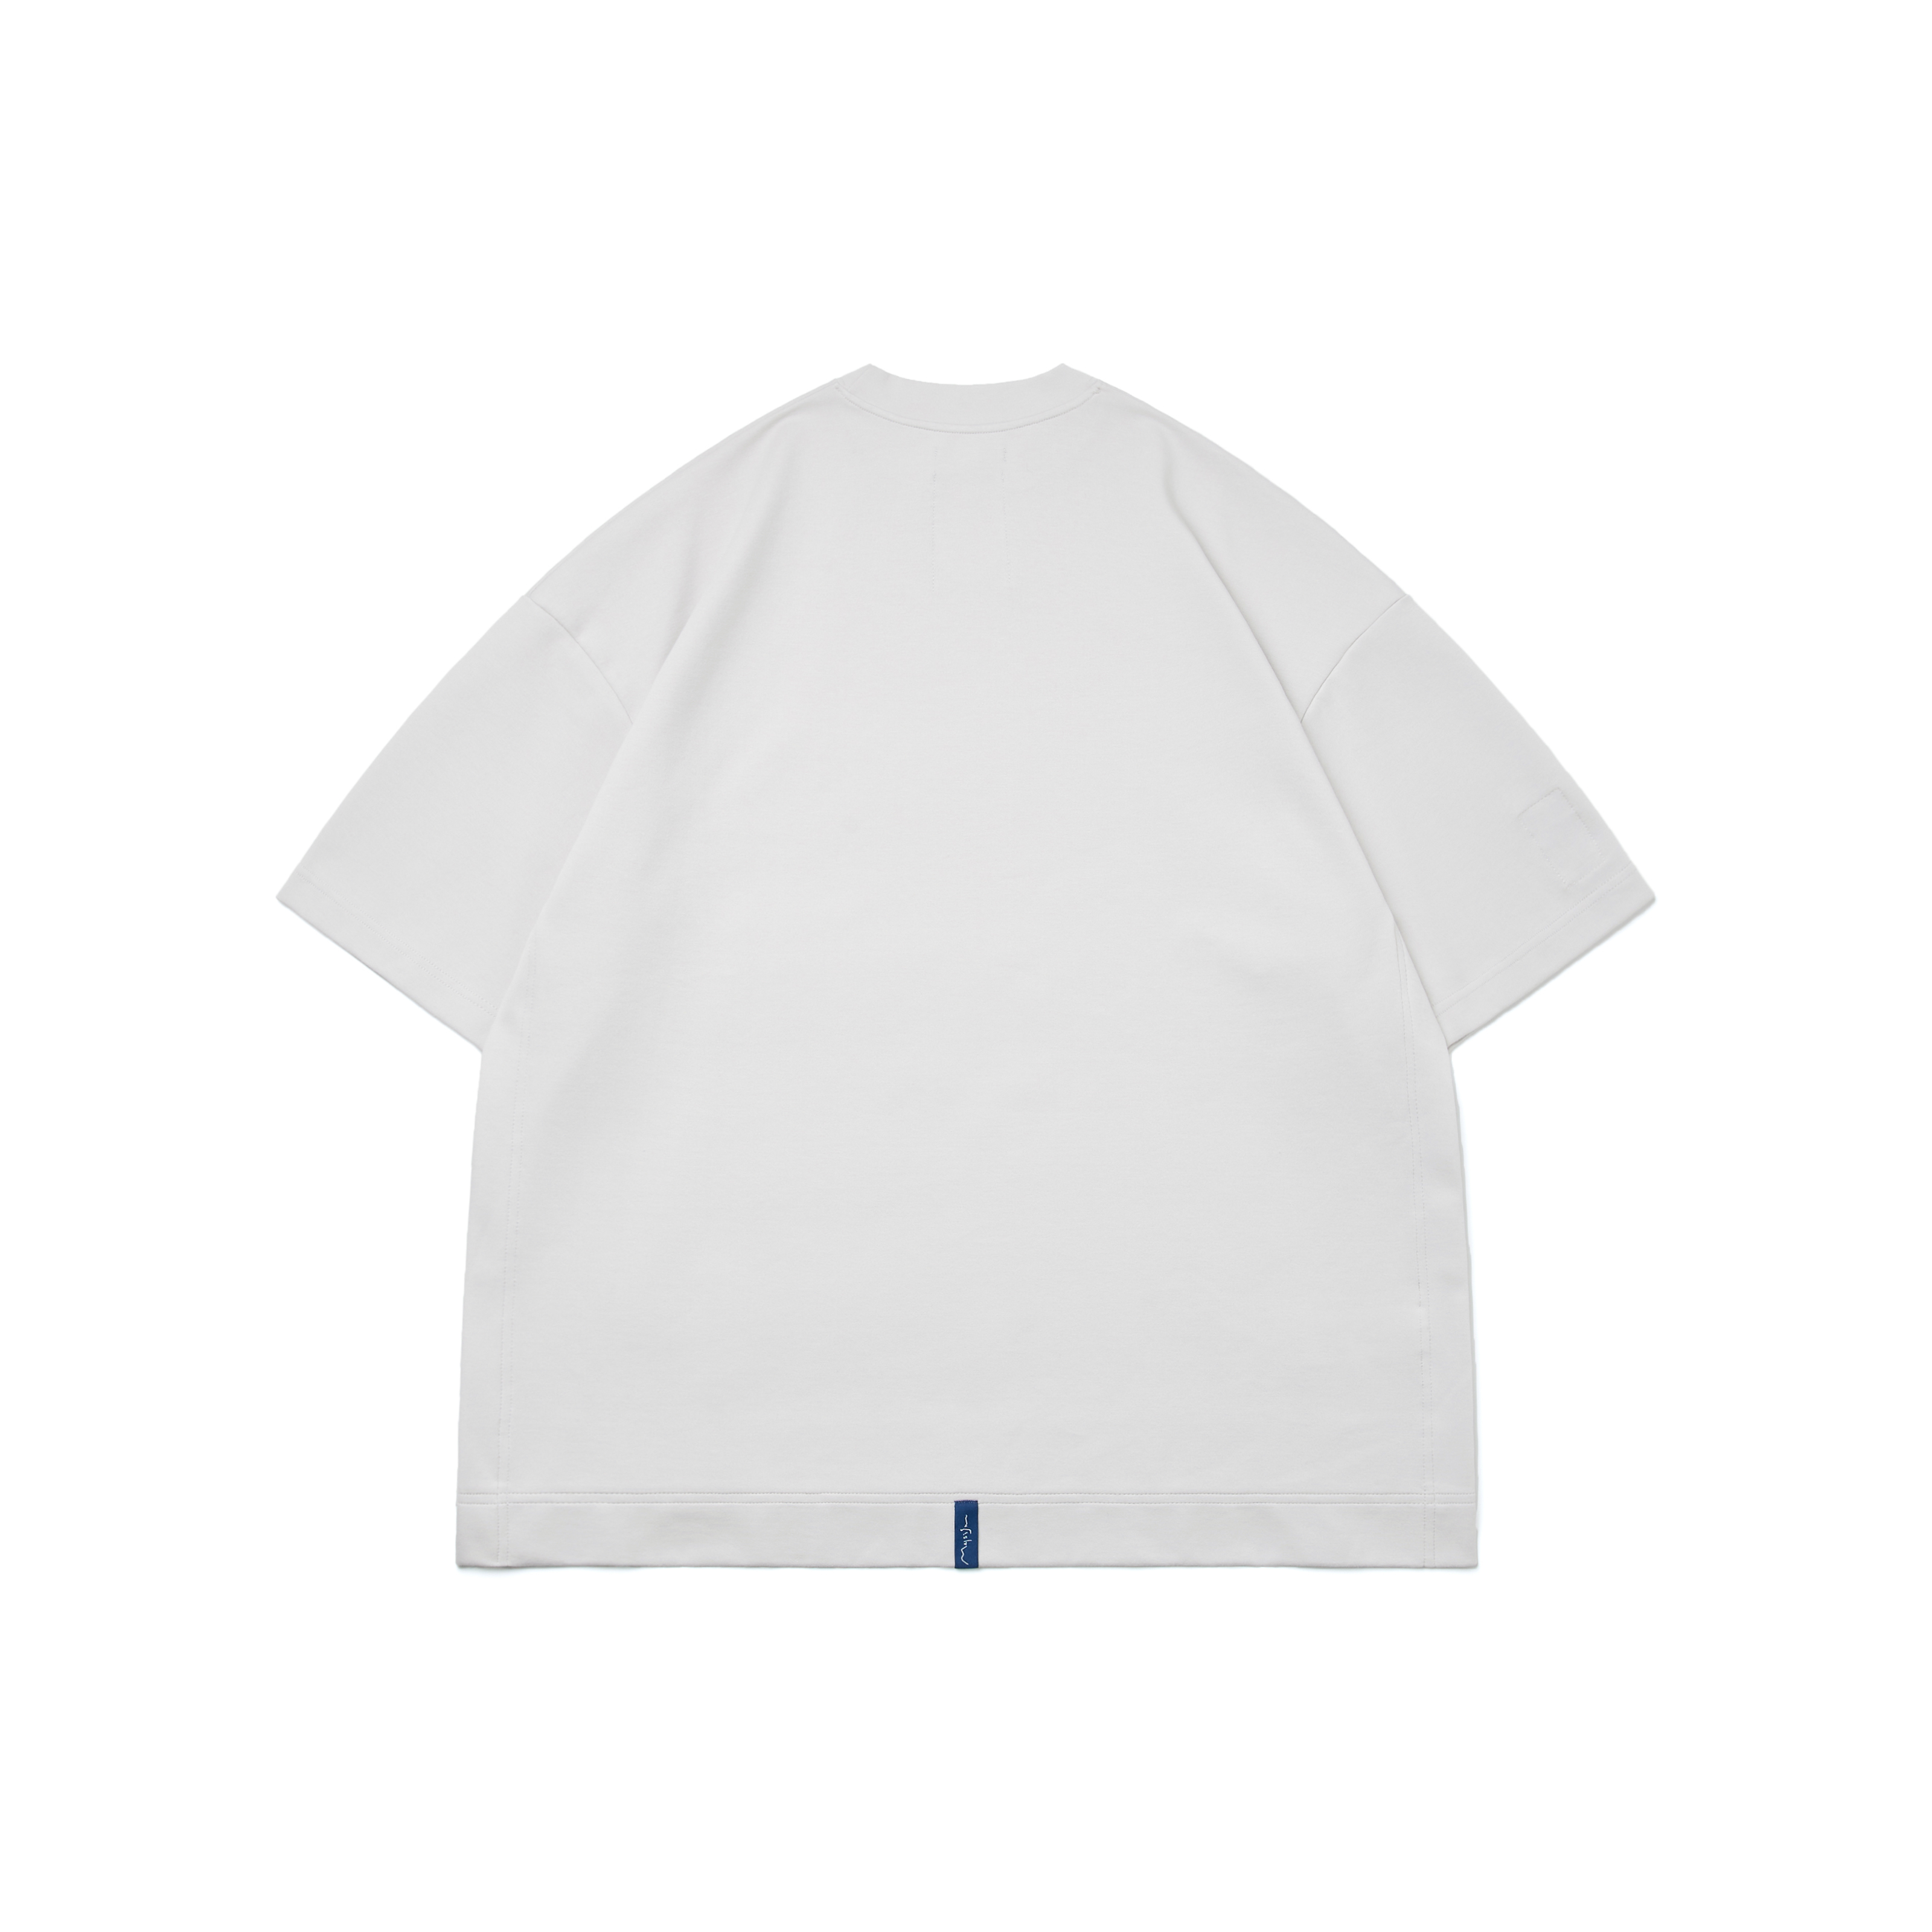 MELSIGN - Cozy Flow Tee - White